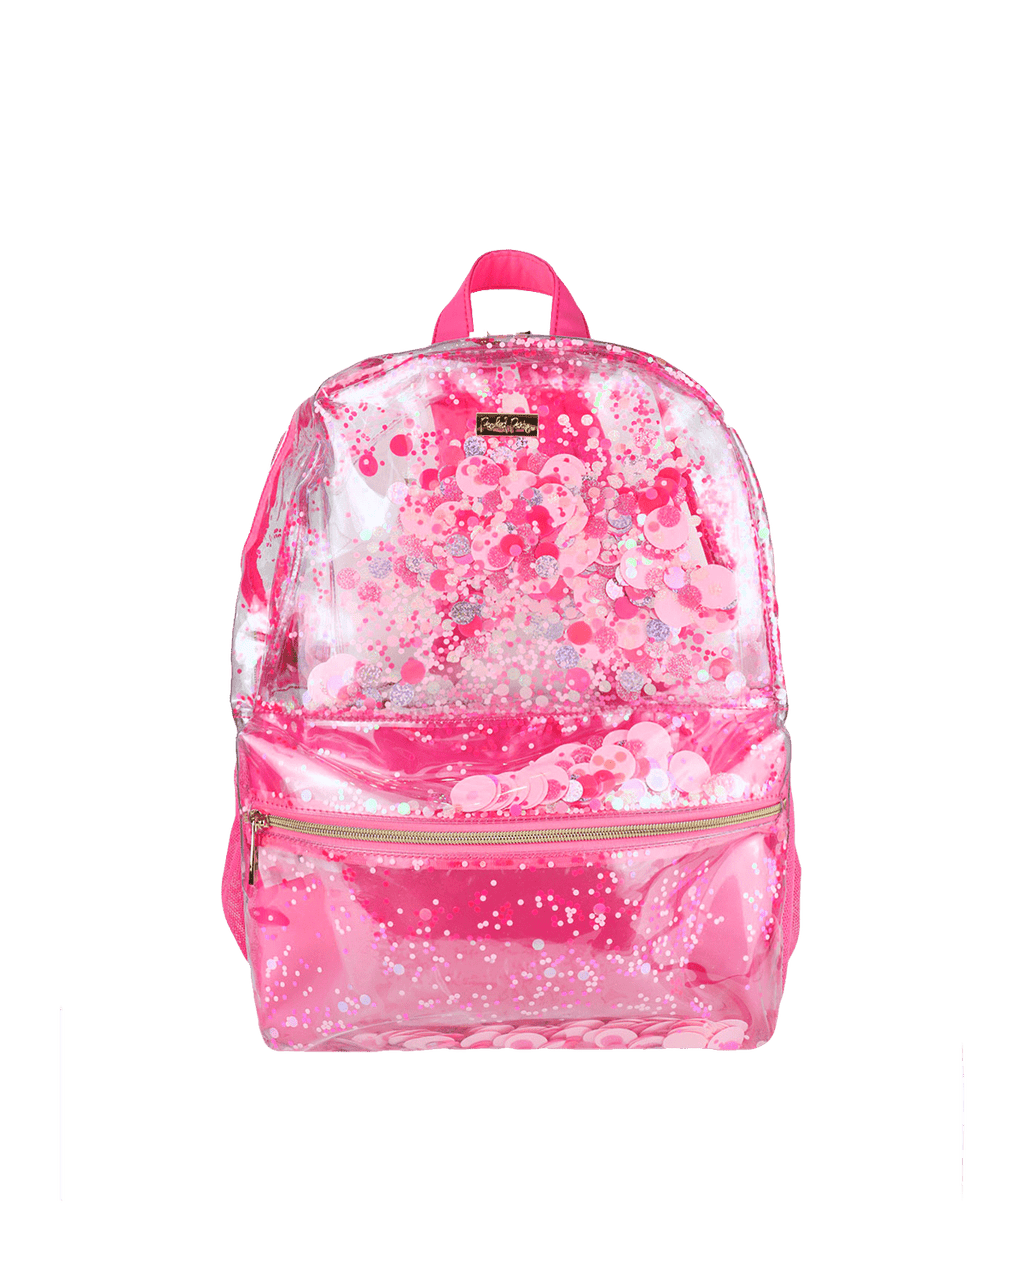 Pink Party Confetti Pink Clear Backpack | Packed Party